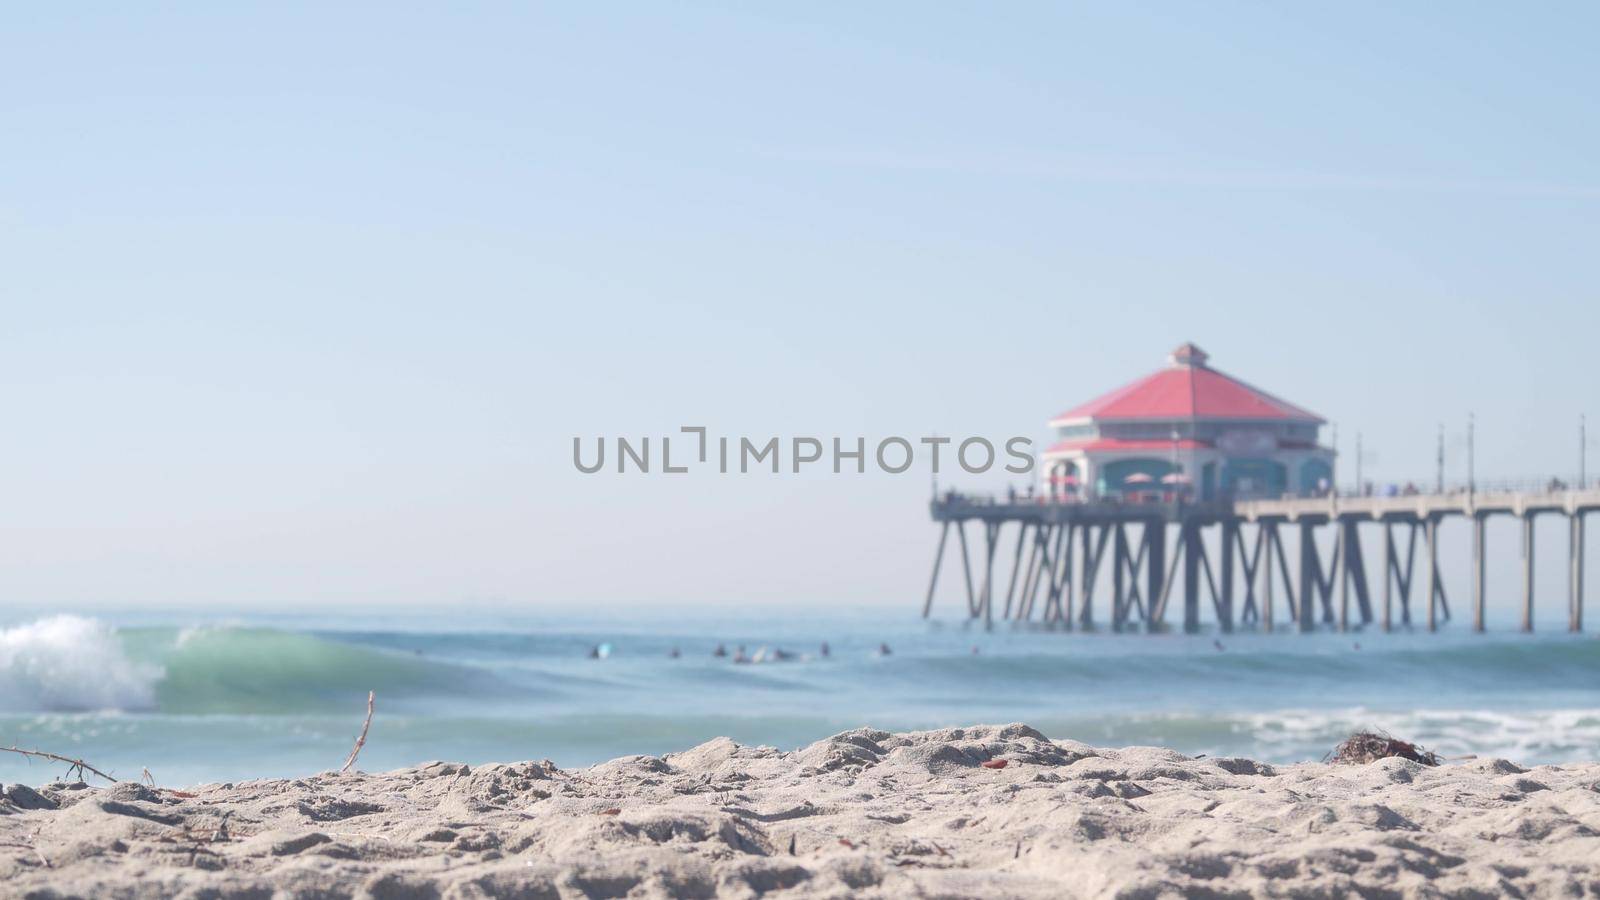 Retro huntington pier, surfing in ocean waves and sandy beach, California coast near Los Angeles, USA. American diner, sea water, beachfront boardwalk, summer vacations. Seamless looped cinemagraph.